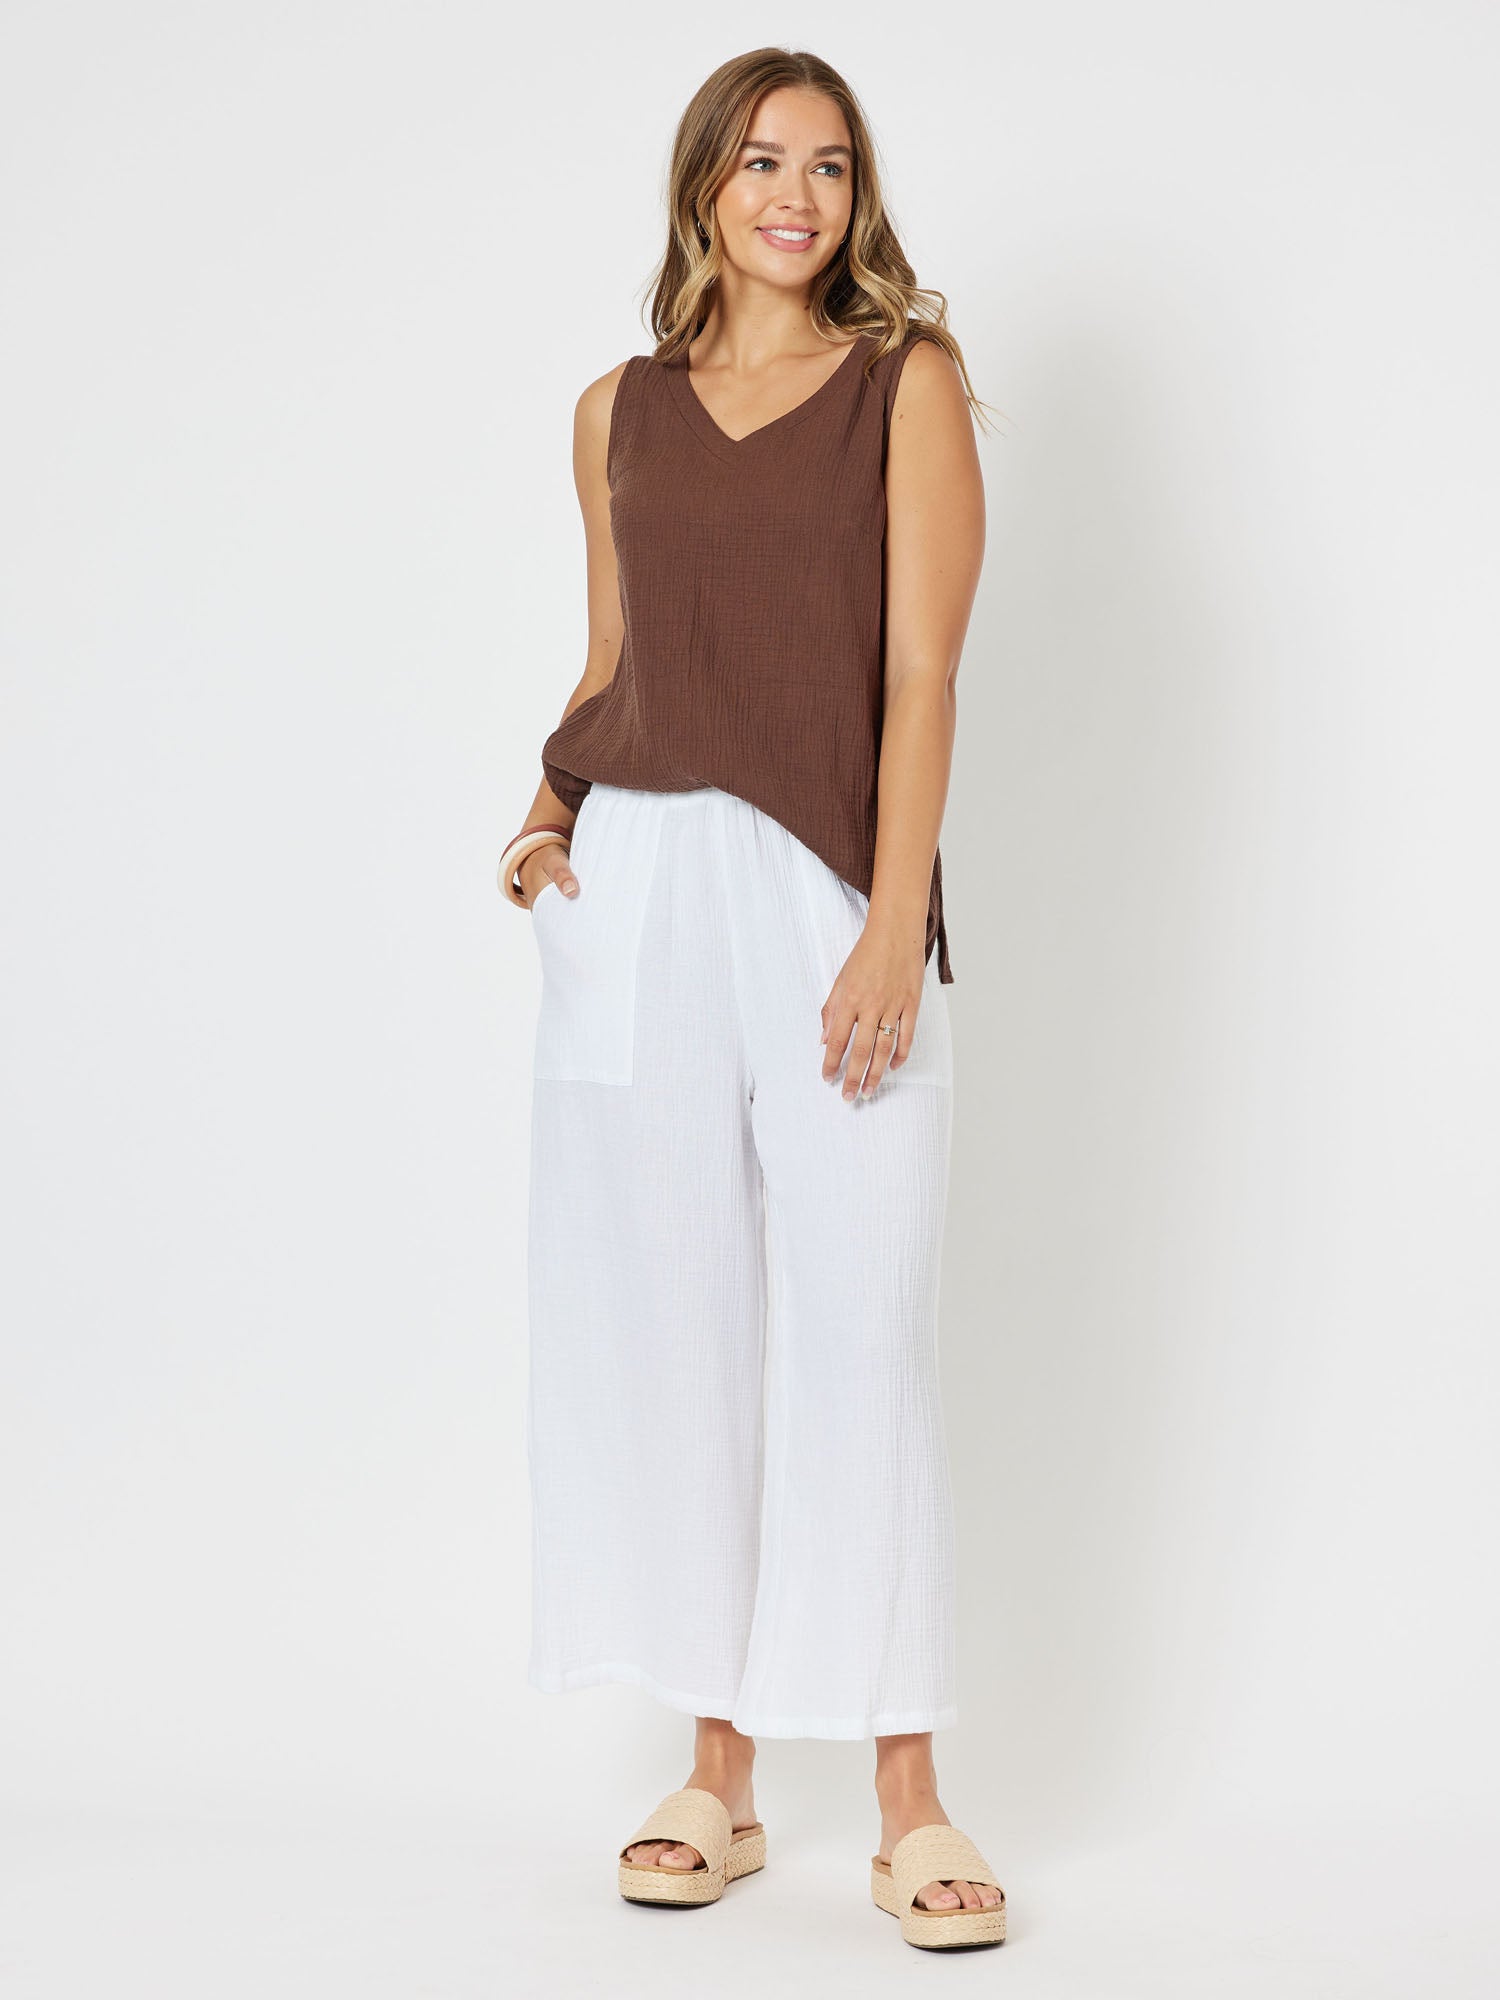 Byron Textured Cotton Wide Leg Pull On Pant - White